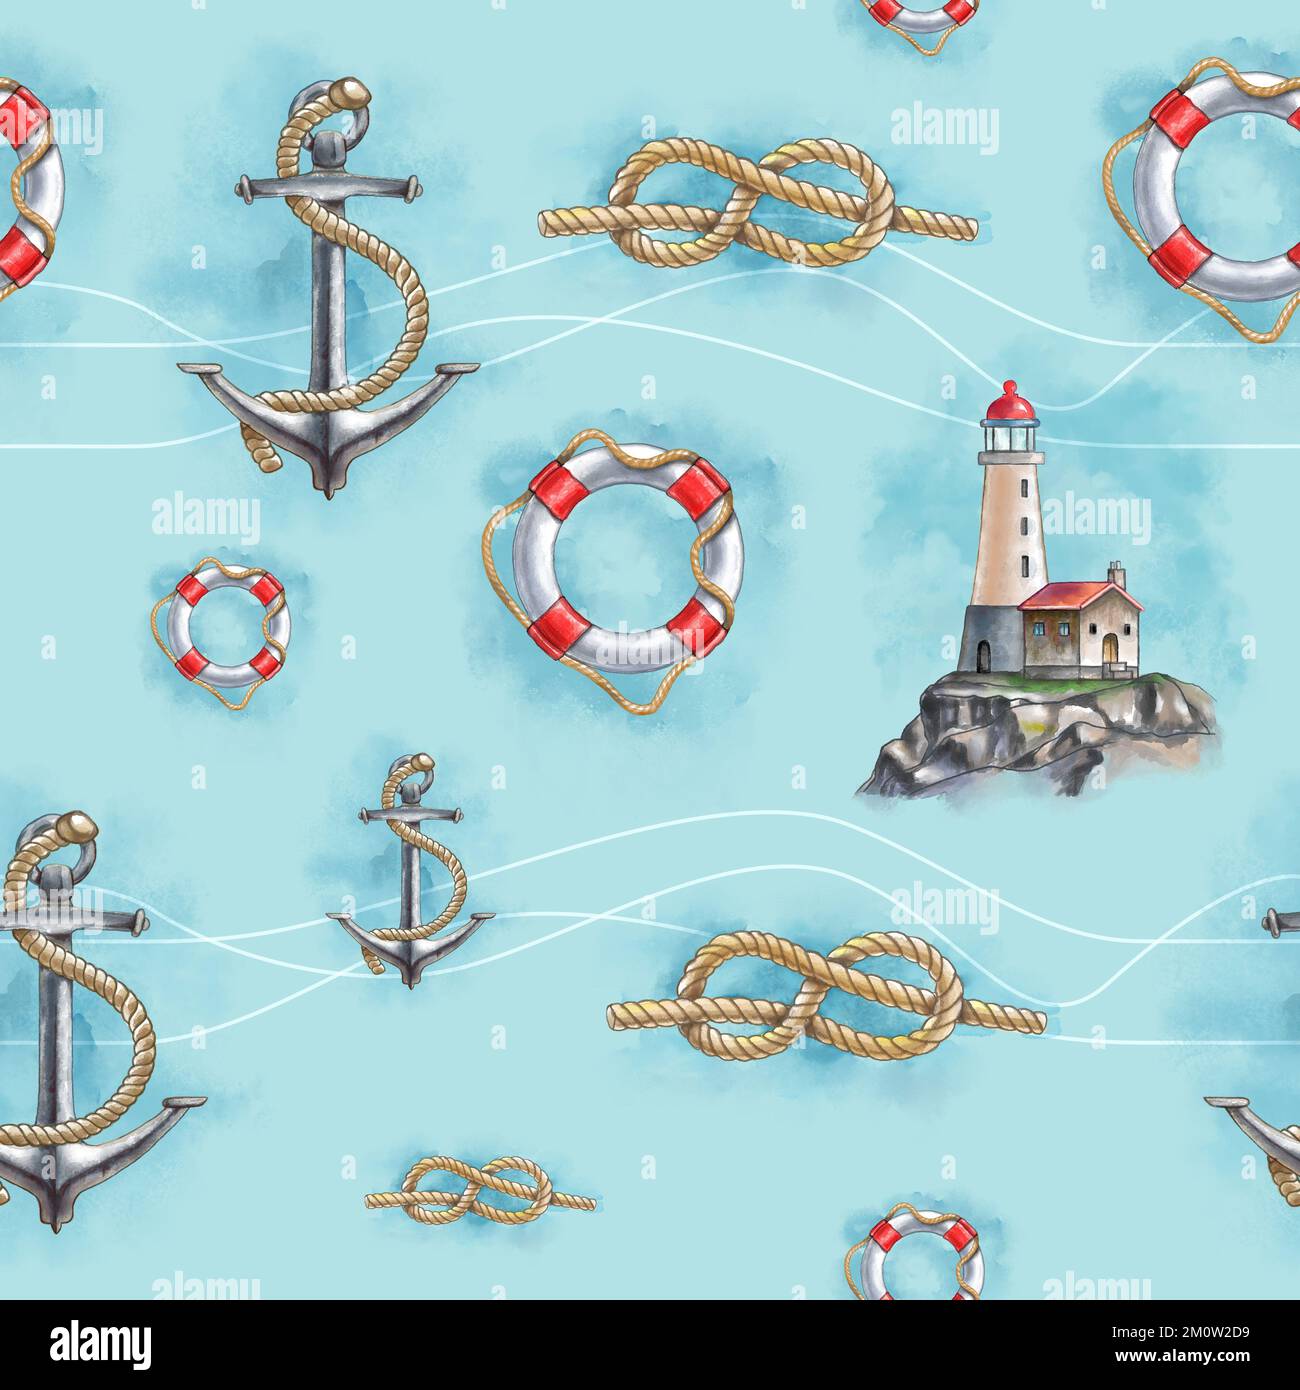 Nautical themed pattern with hand-drawn elements including a lifesaver, rope, anchor and lighthouse. Digital illustration. Stock Photo